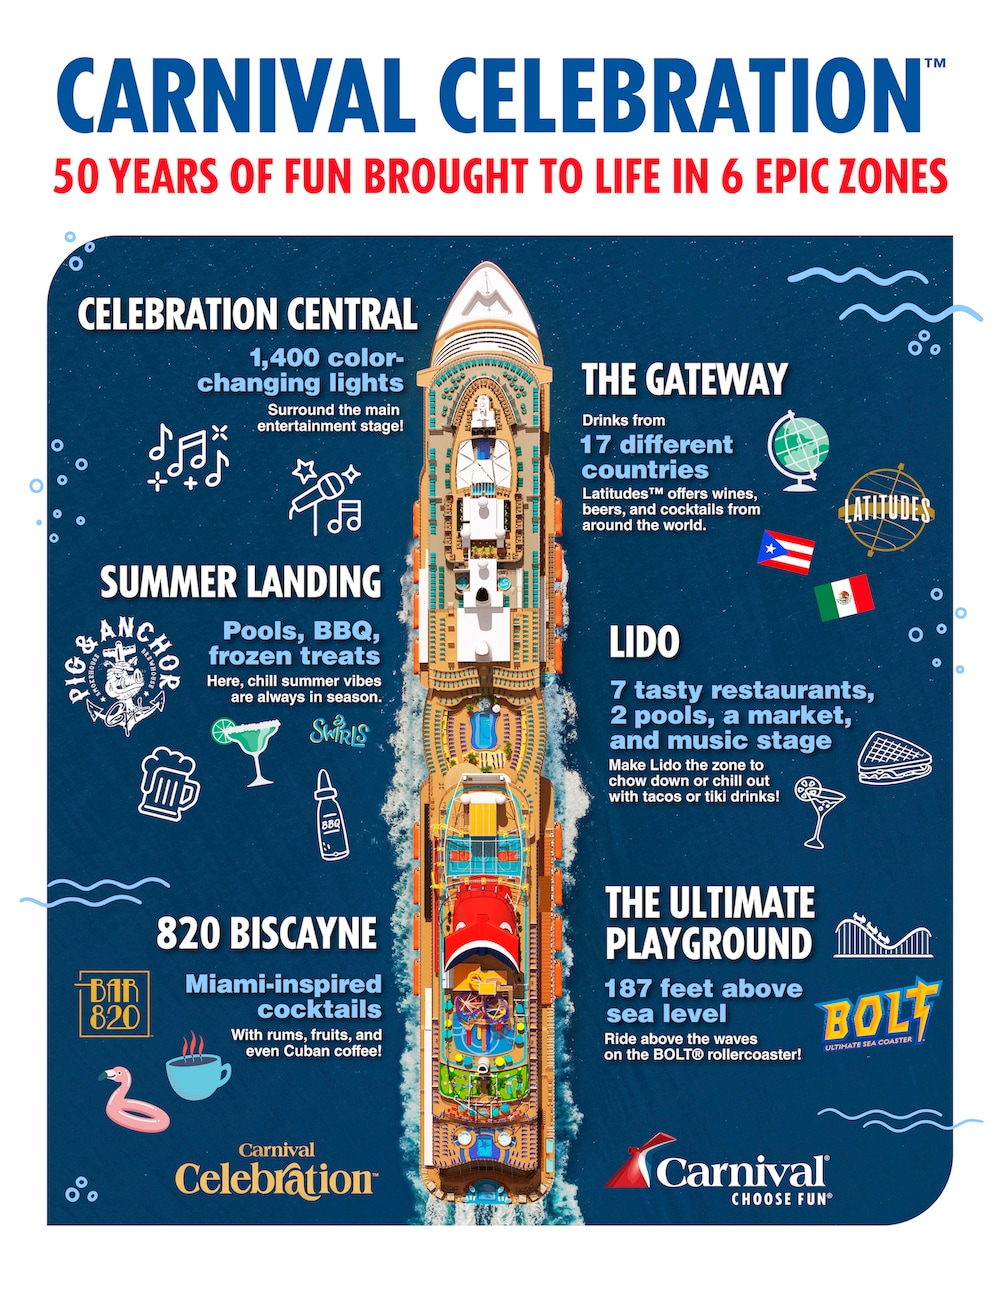 Infographic of Carnival Celebration, outlining all 6 zones and their highlights.